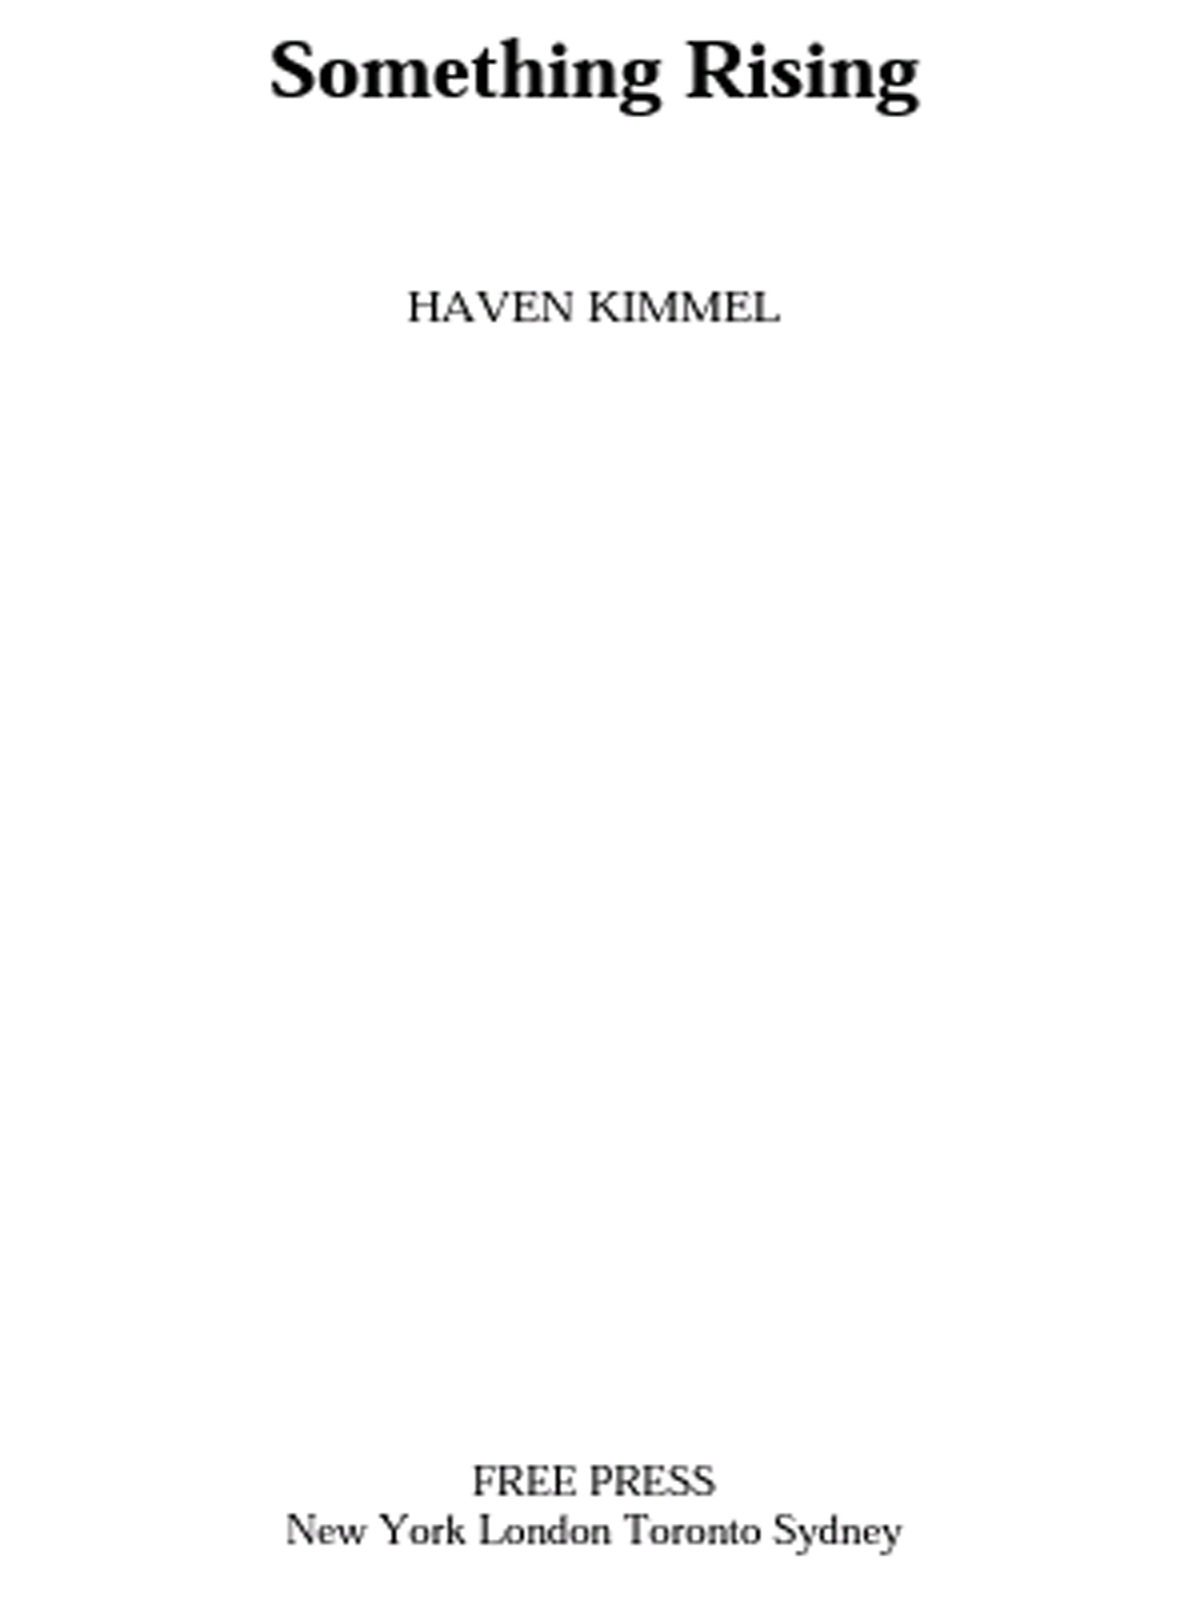 Something Rising (Light and Swift) (2003) by Haven Kimmel